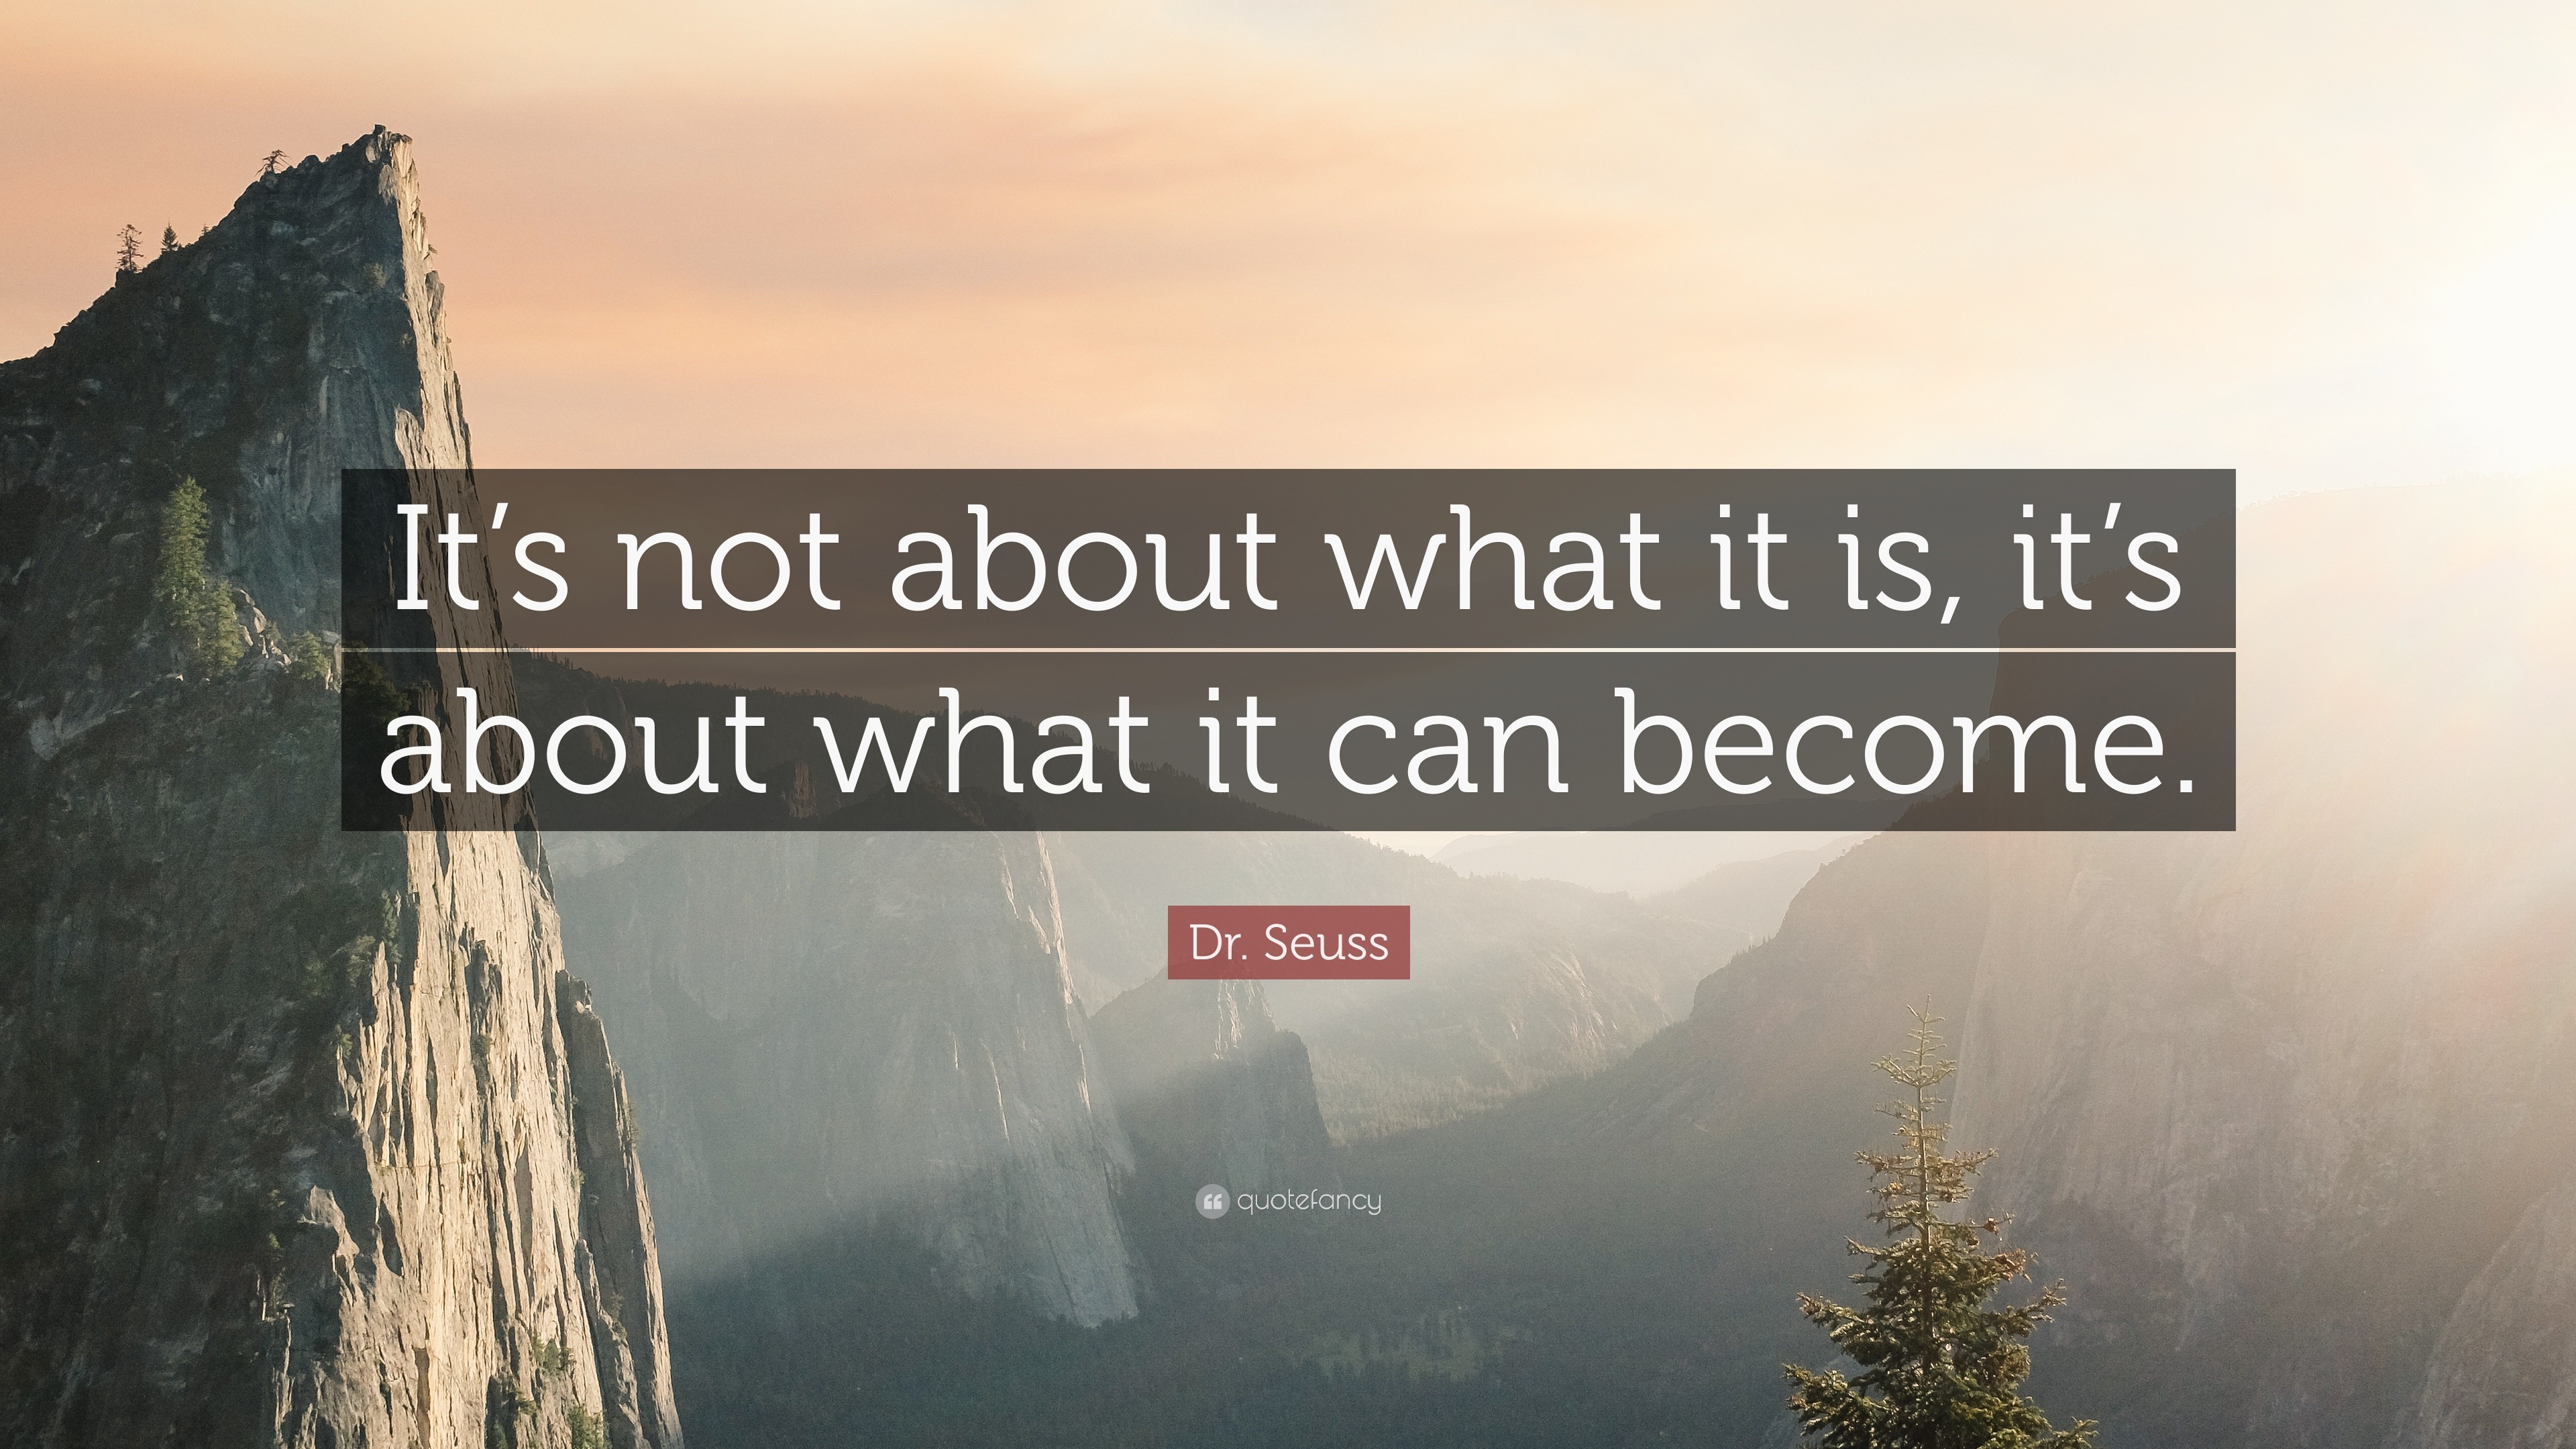 Dr. Seuss Quote: “It's not about what it is, it's about what it can become.”